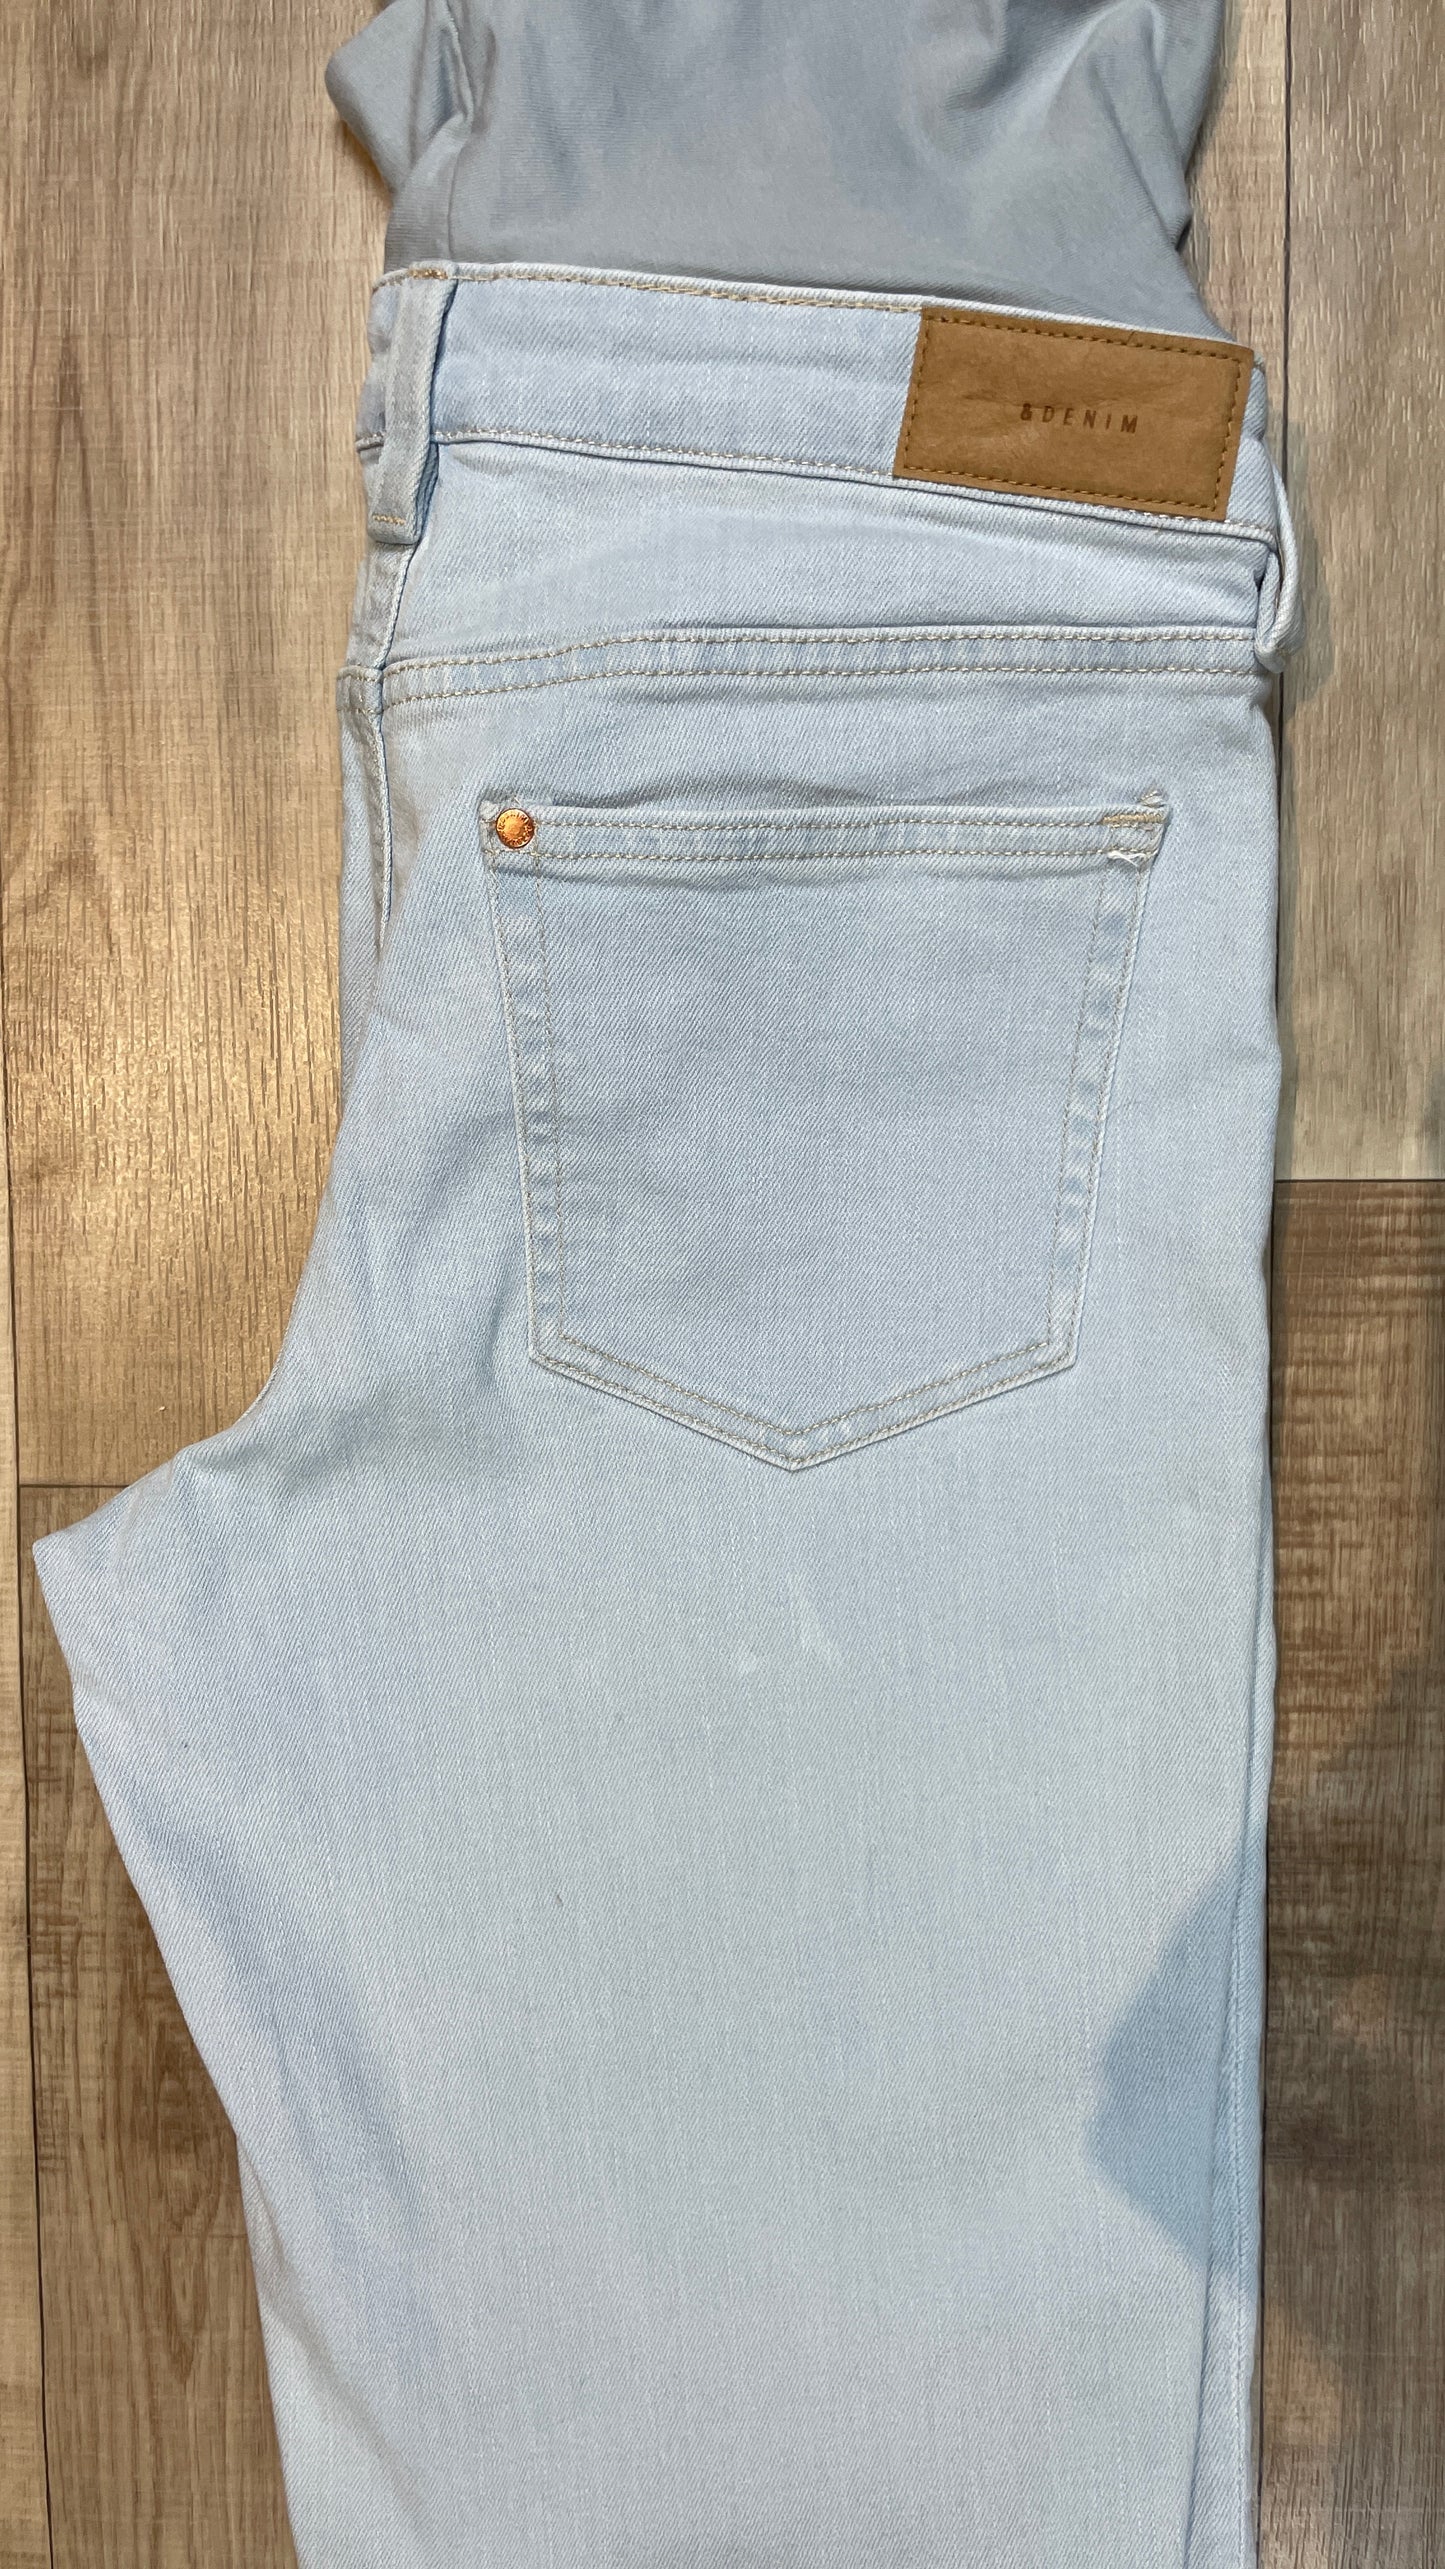 SMALL - Jeans H&M